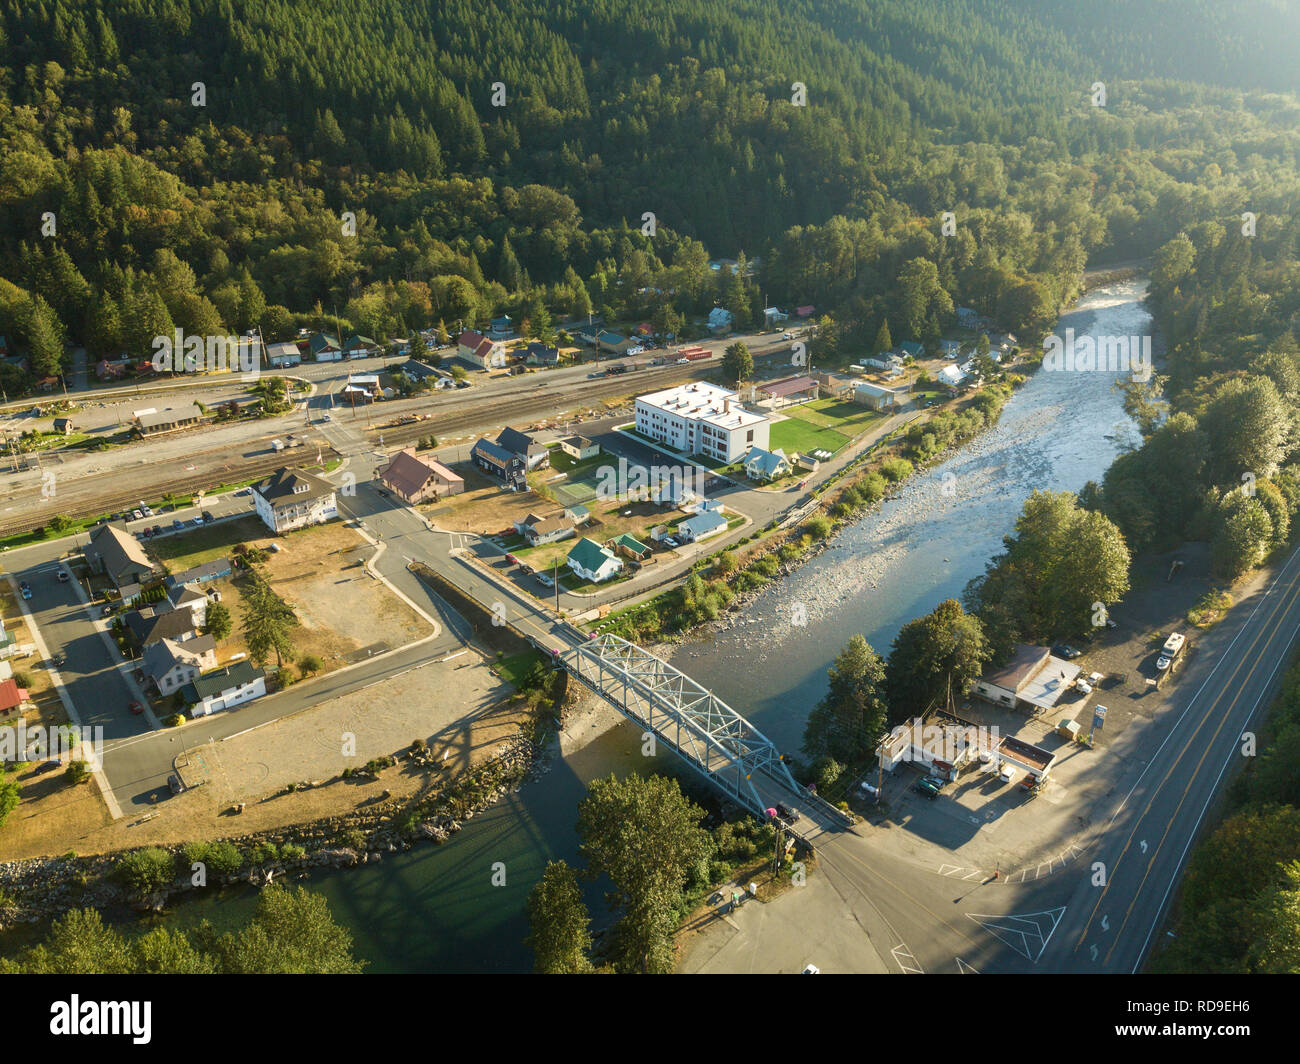 An aerial view of the town of Skykomish in the Cascade Mountains of Washington State. Stock Photo